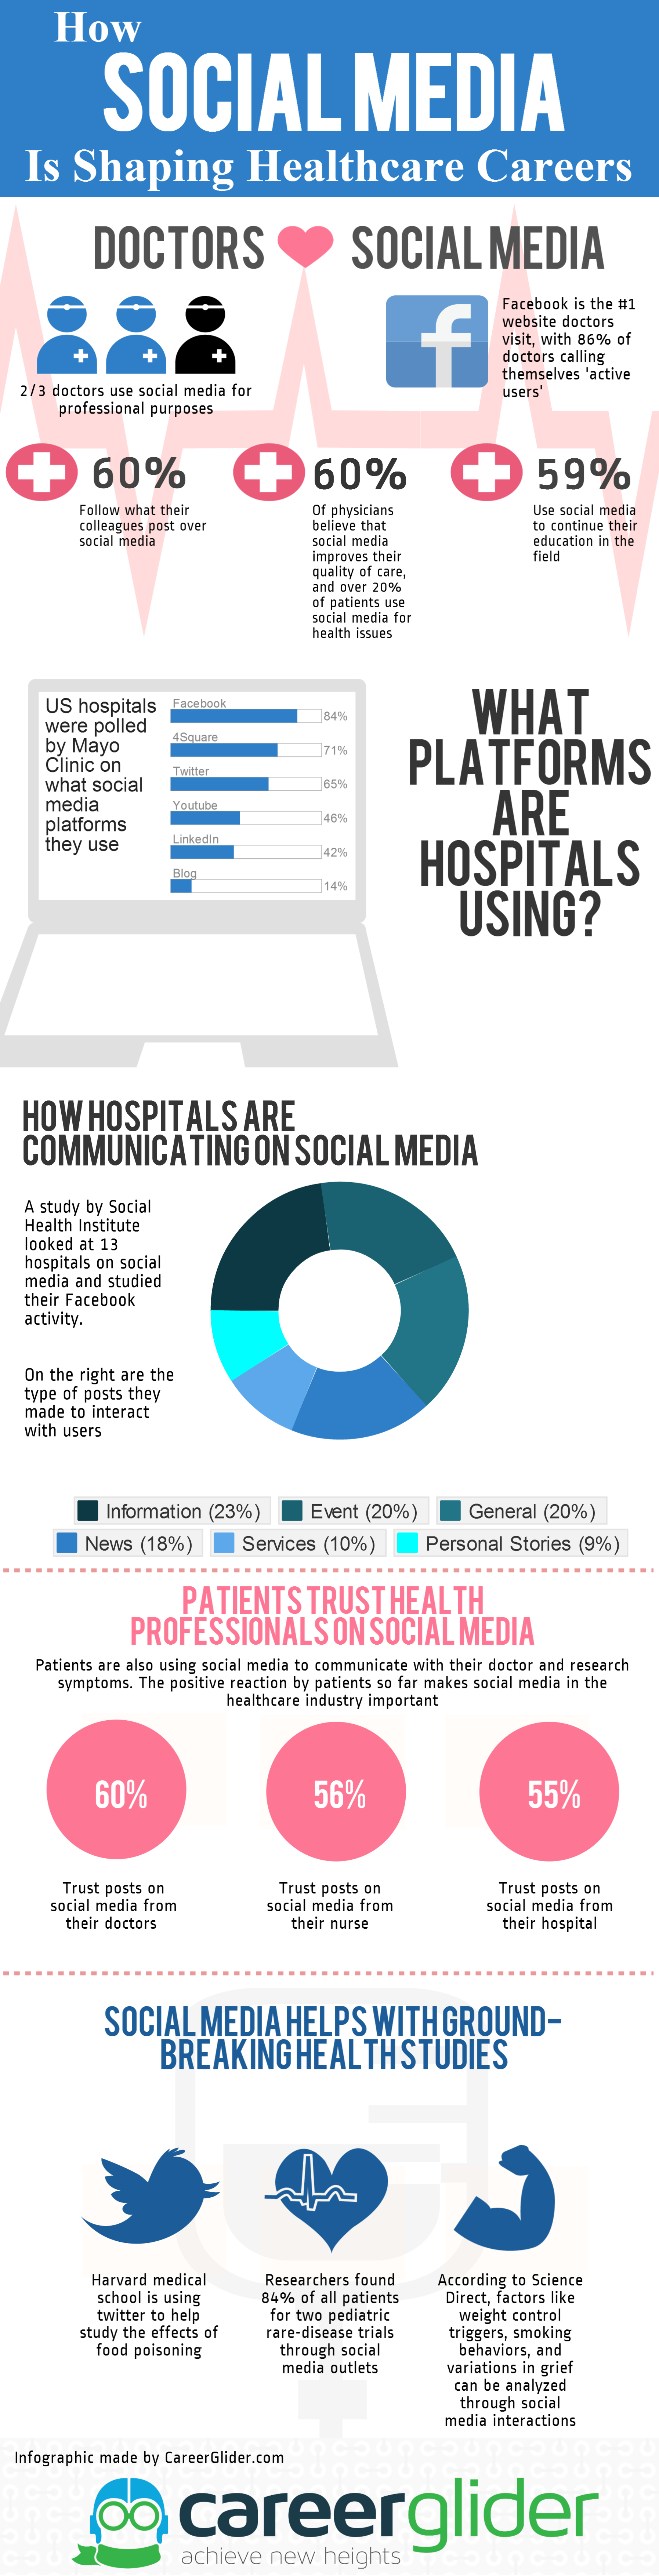 How Social Media is Shaping the Health Industry